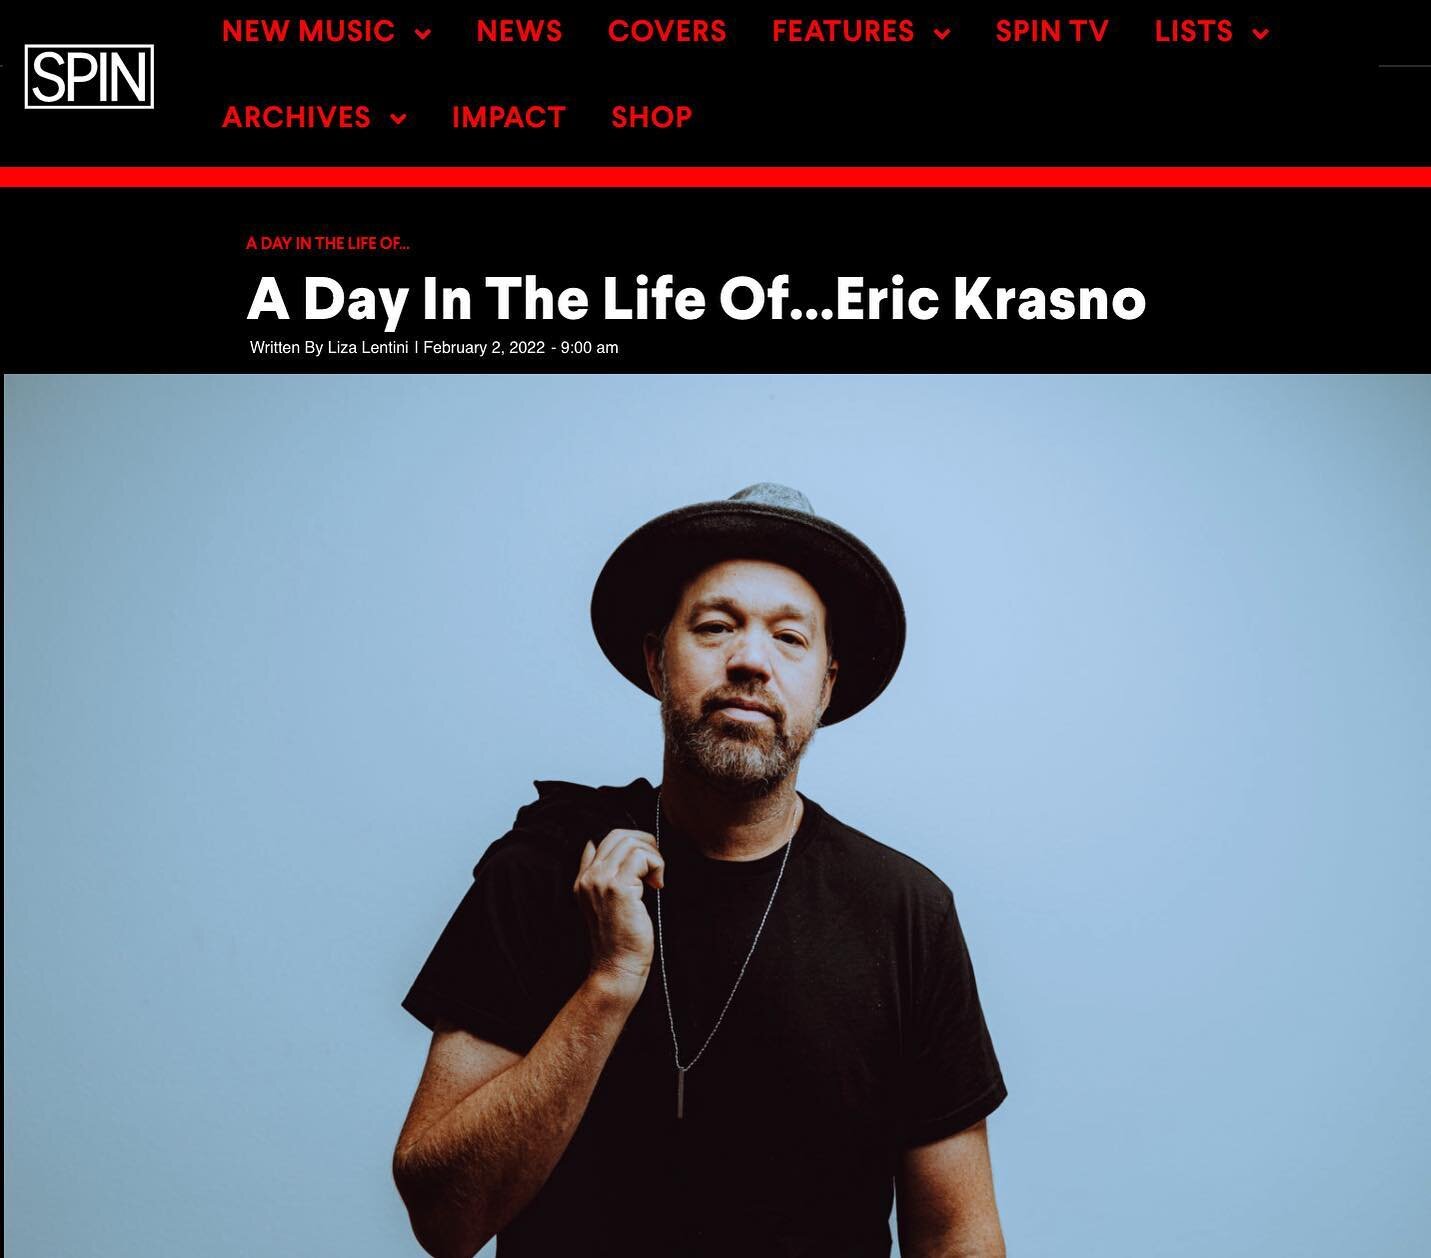 Head on over to @spinmag to watch a &ldquo;day in the life&rdquo; with the GRAMMY-winning guitarist @erickrasno, as he prepares to release his new album &lsquo;Always&rsquo; this Friday. &ldquo;Always reflects his journey as a husband and new father 